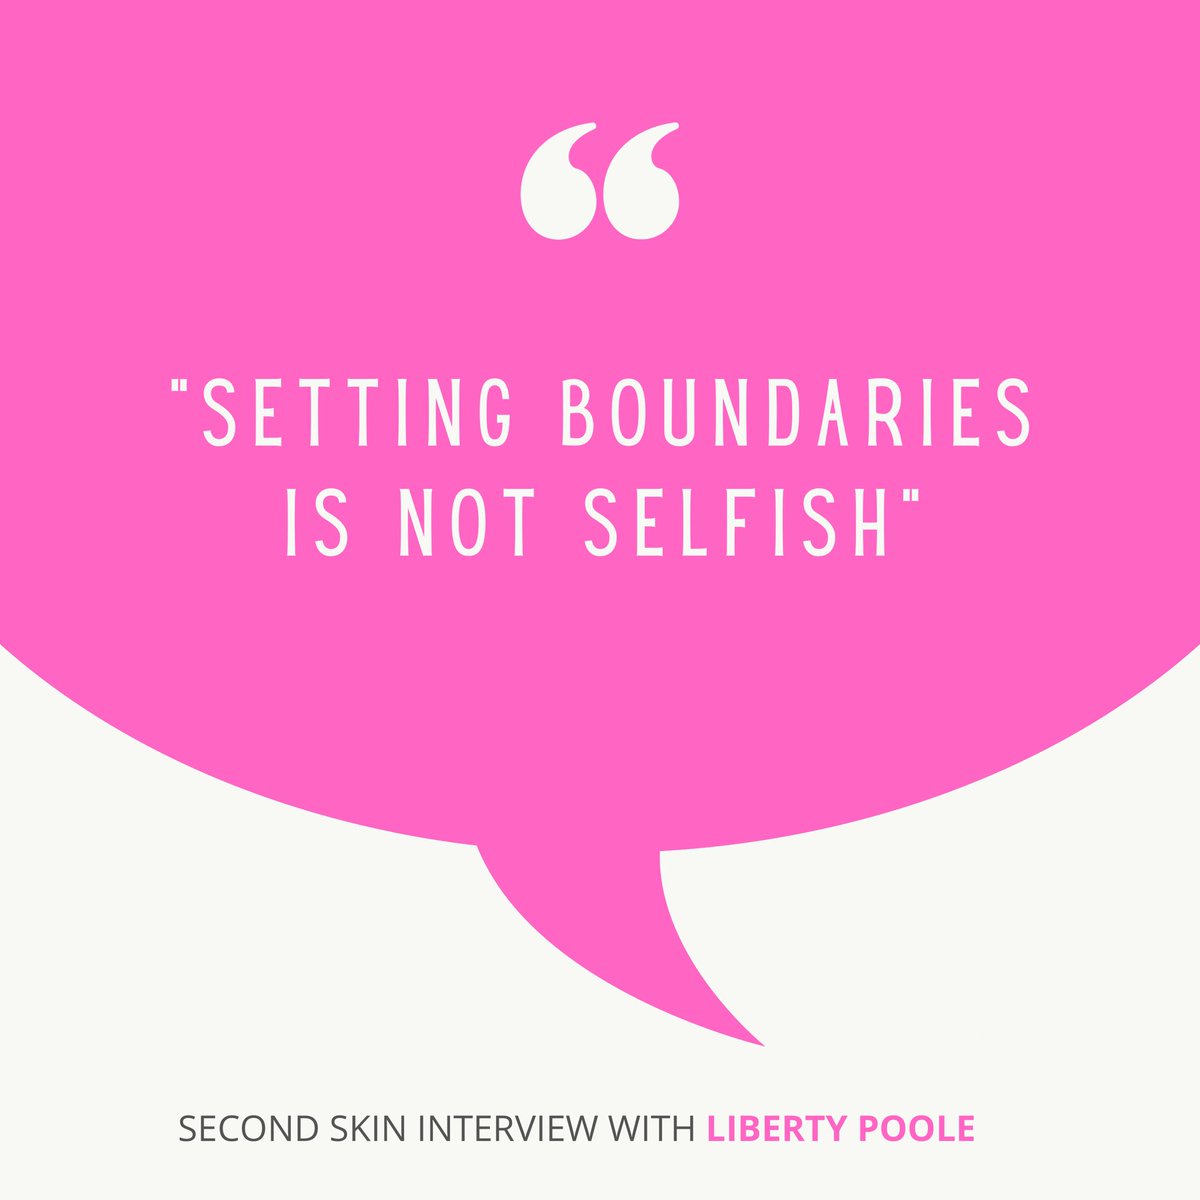 TEASER ALERT 🔔 Our interview with LIBERTY POOLE will be available to listen to in full on Wednesday 6th September! In the meantime here are a few quotes from the interview 🩷 #mentalhealth #bodypositive #socialmedia #21AOK #kindness #bekind #youareenough